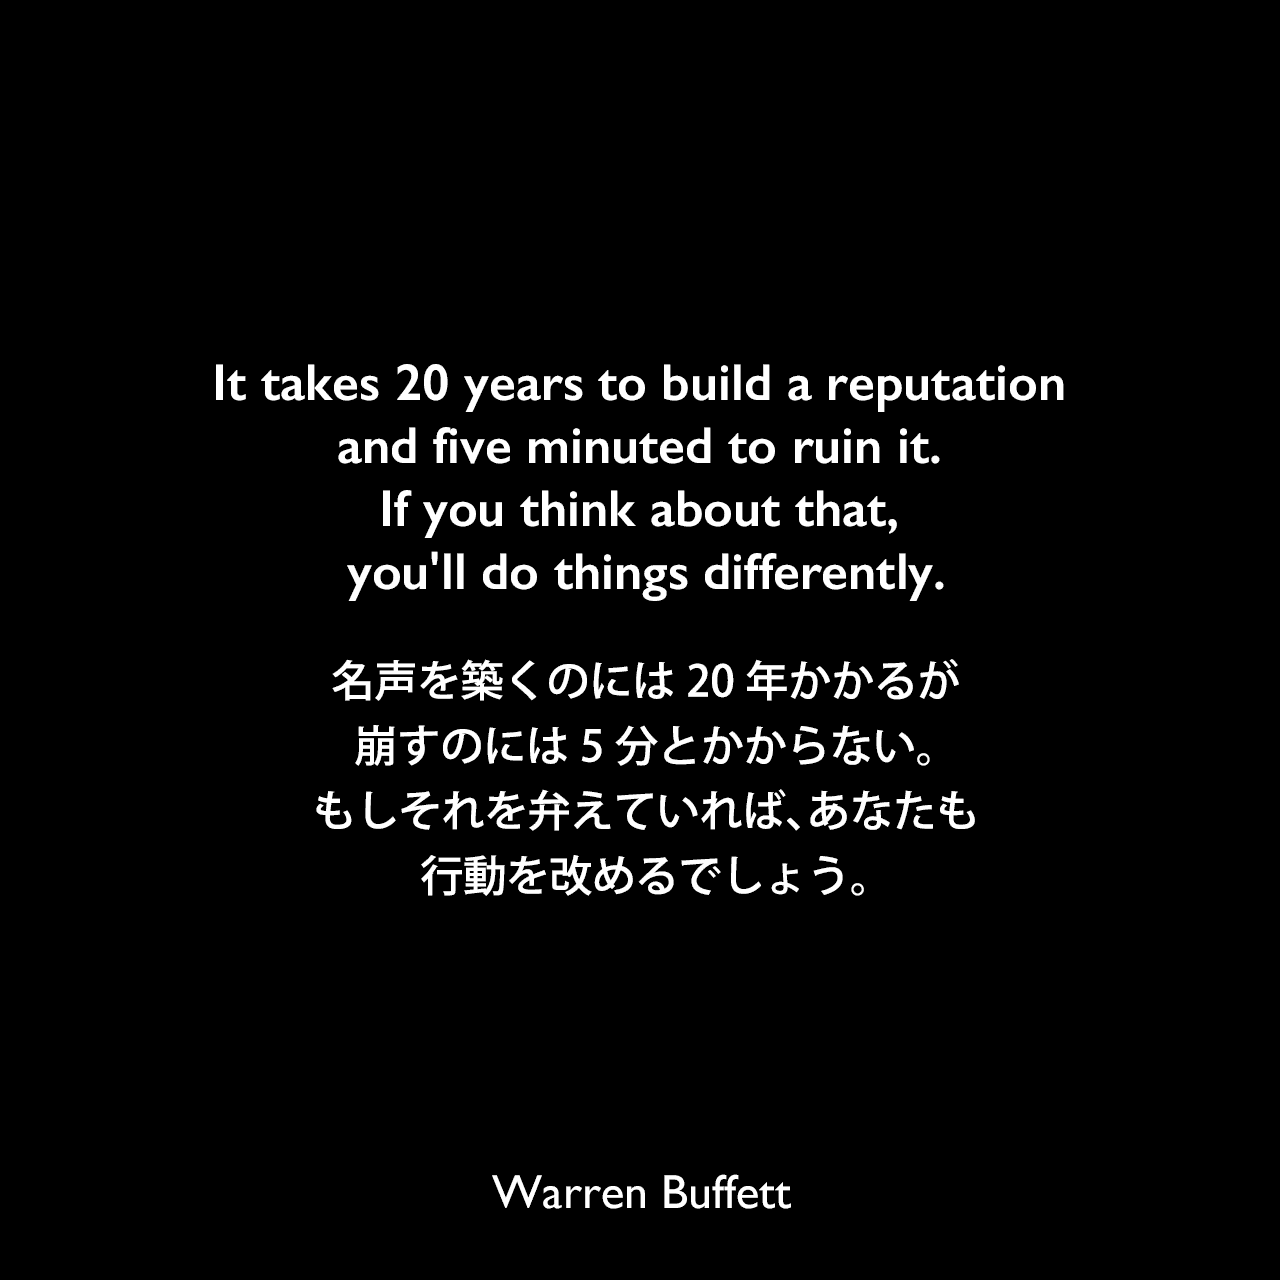 It takes 20 years to build a reputation and five minuted to ruin it. If you think about that, you'll do things differently.名声を築くのには20年かかるが、崩すのには5分とかからない。もしそれを弁えていれば、あなたも行動を改めるでしょう。Warren Buffett